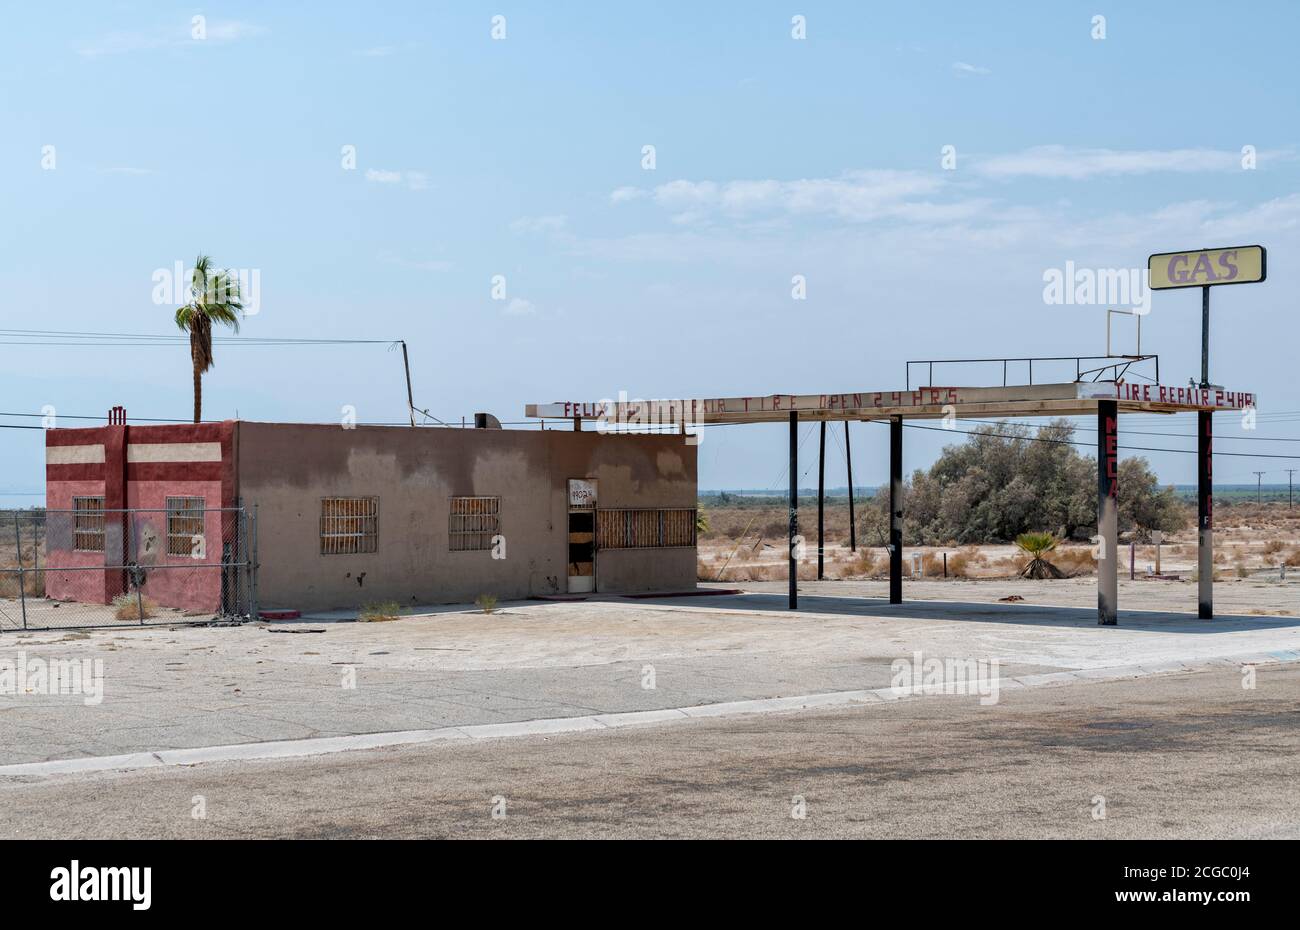 An abandoned gas station with vintage sign in Salton Sea, California, USA Stock Photo